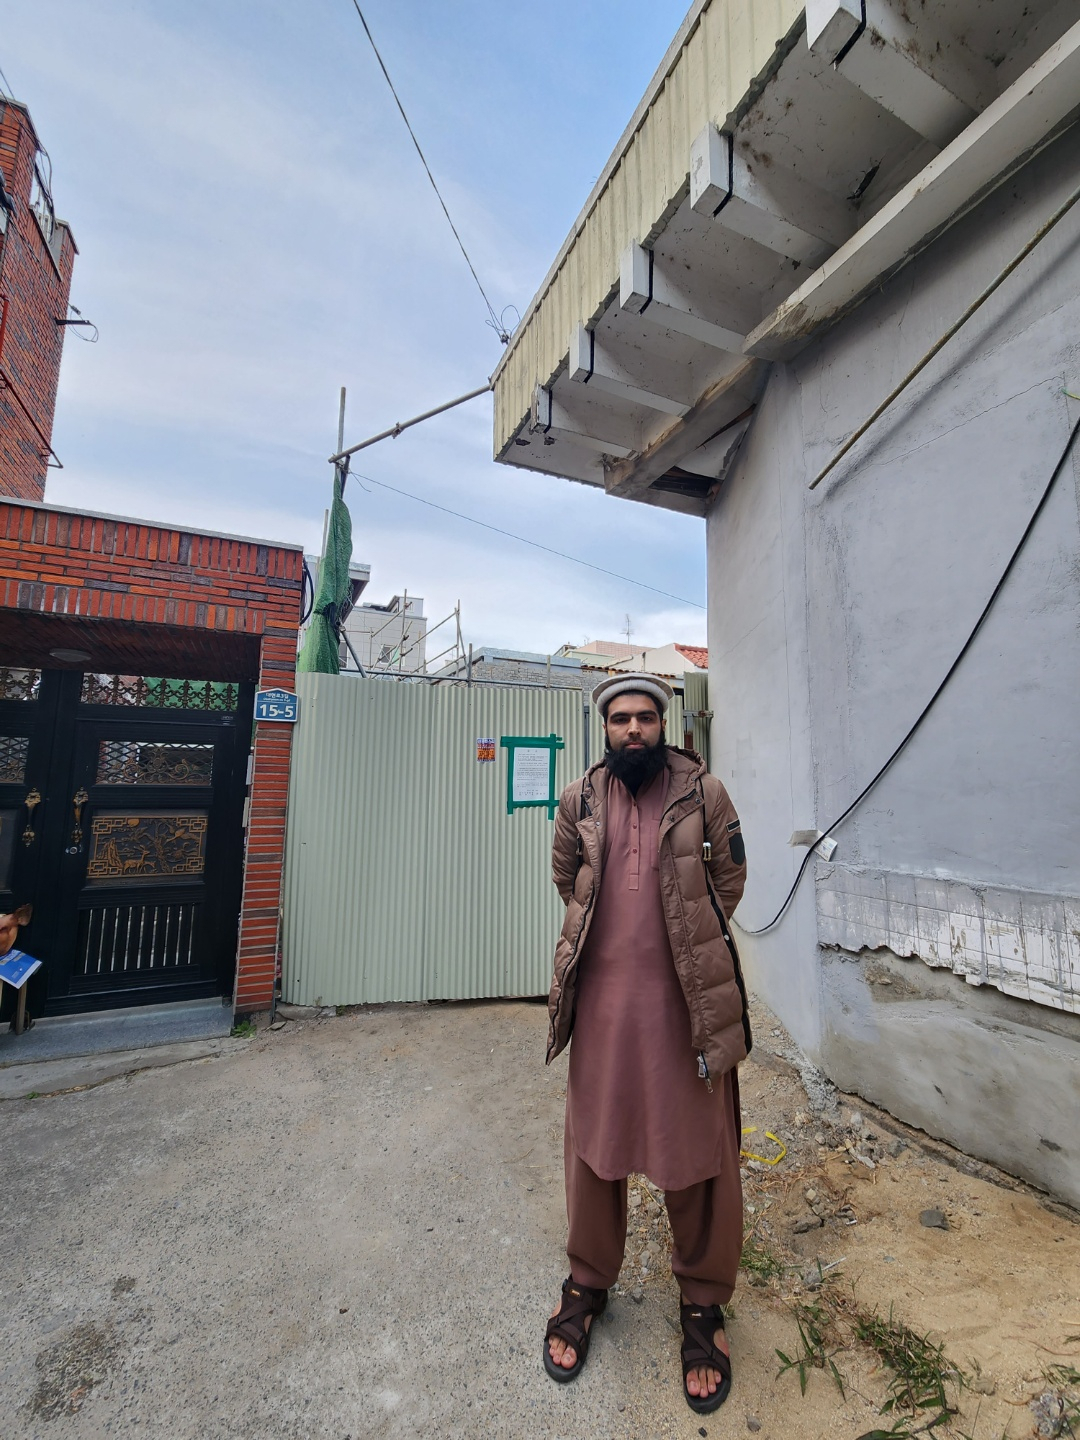 Muaz Razaq, 26, a Muslim student at Kyungpook National University, stands outside the construction site of a mosque in Daegu on Wednesday.  (Choi Jae-hee/The Korea Herald)